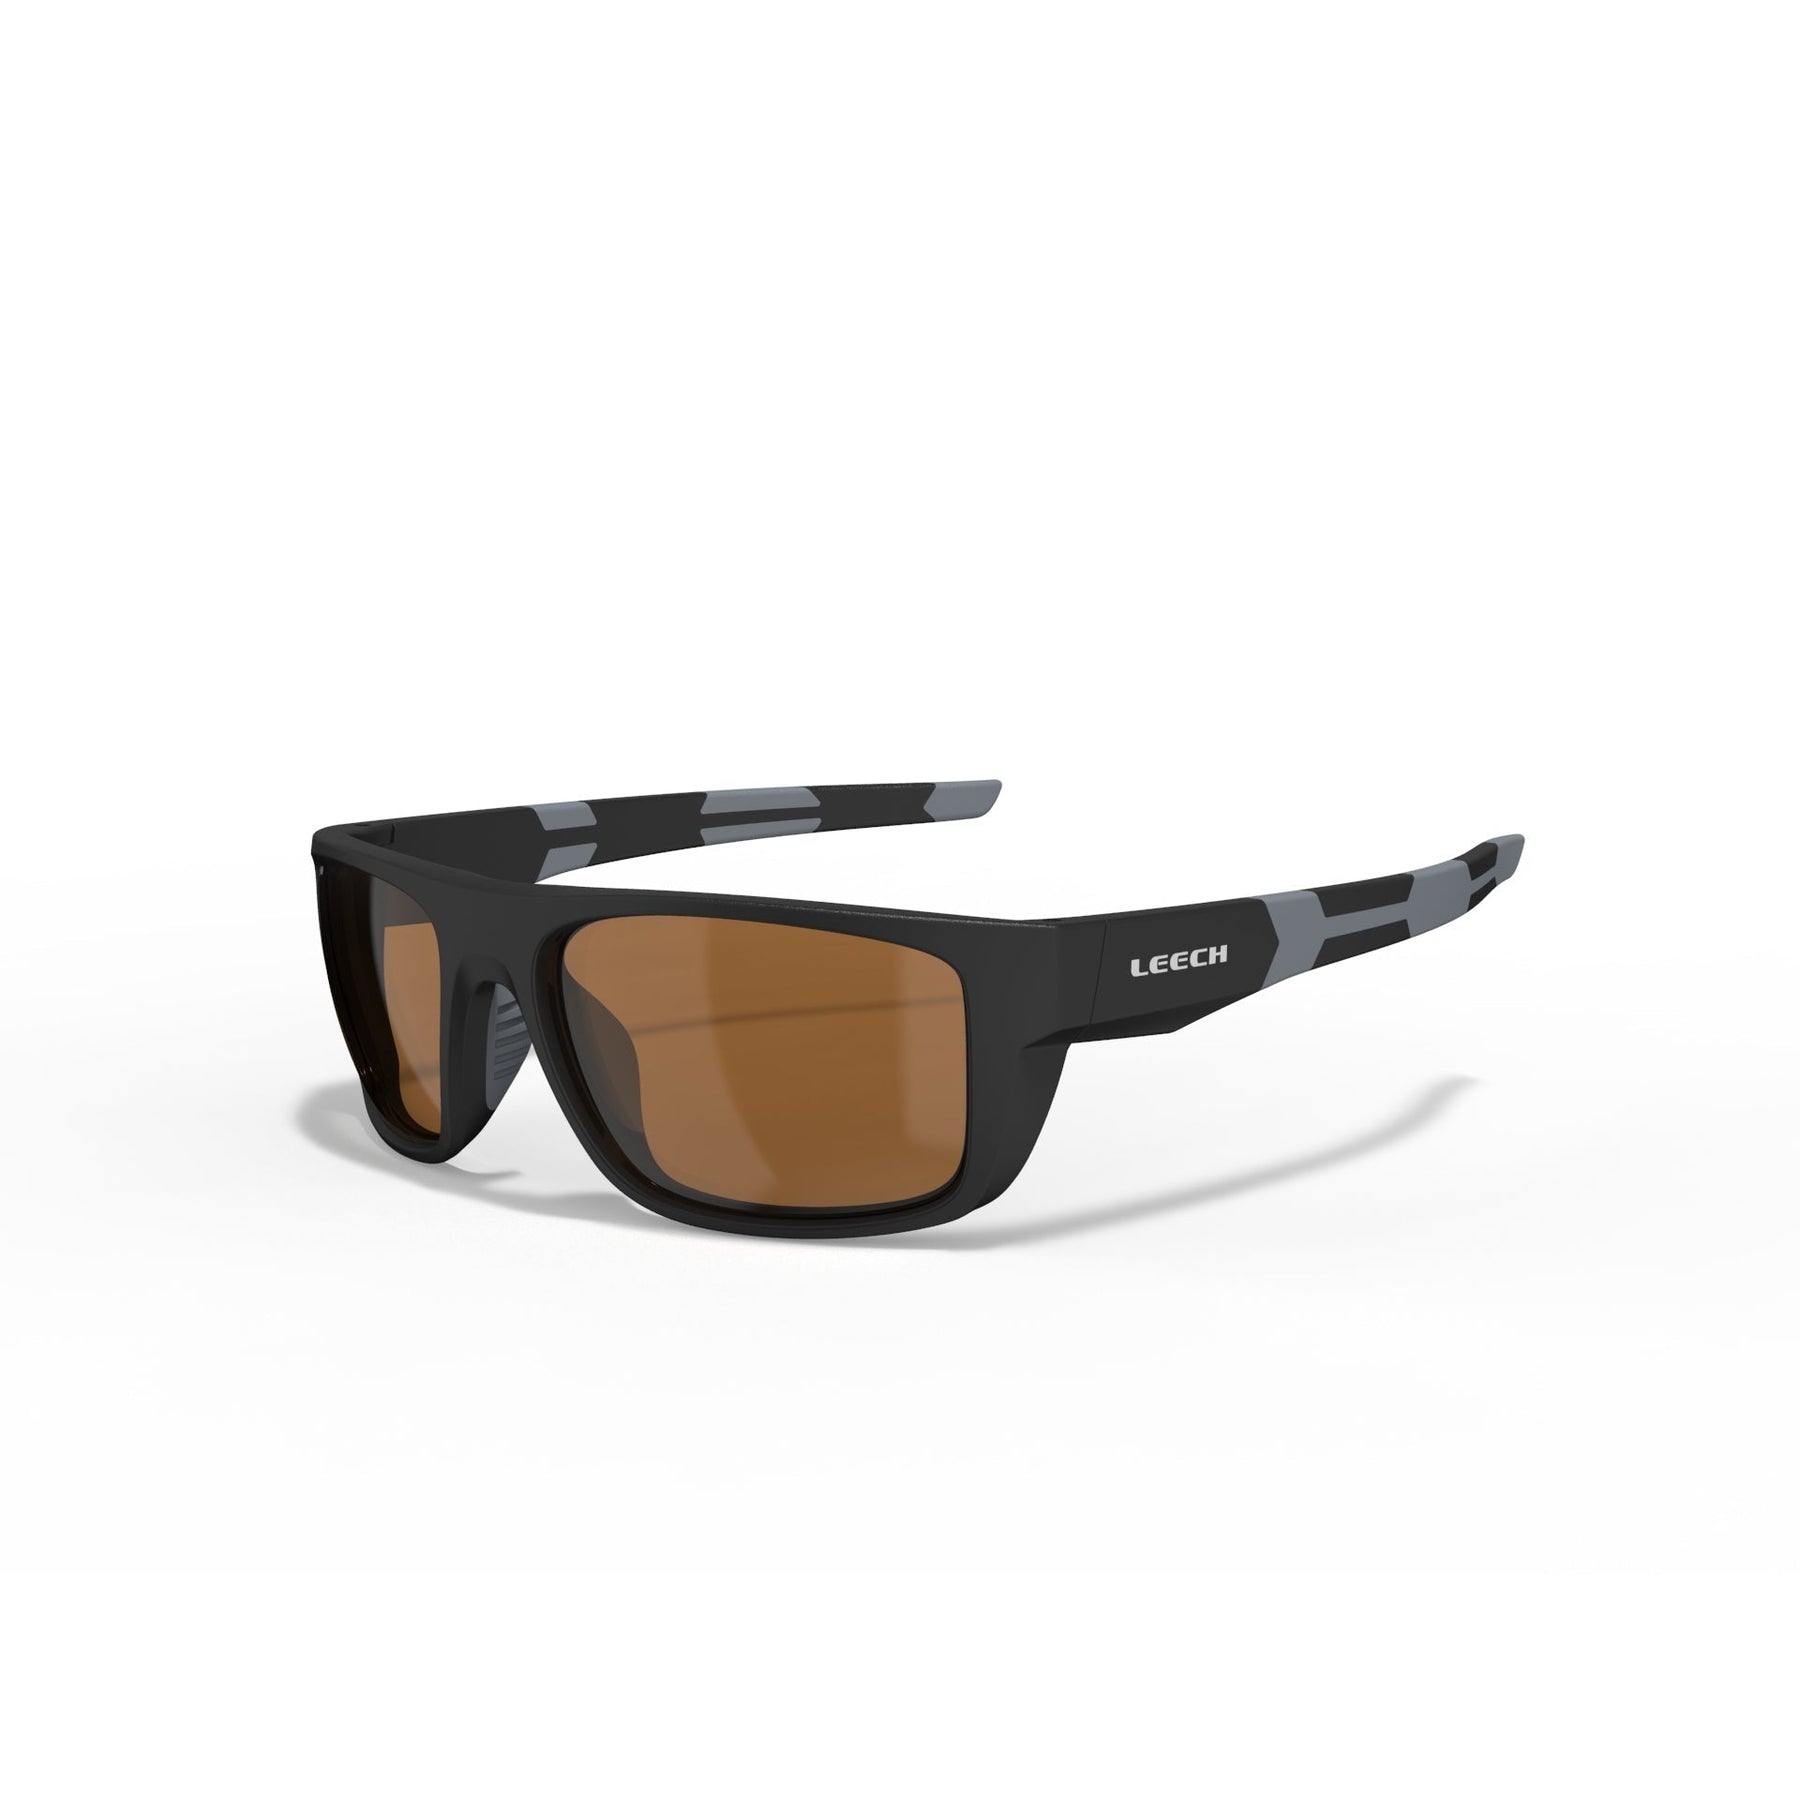 View of Sunglasses Leech Eyewear MOONSTONE Polarized Fishing Sunglasses Moonstone Grey - Copper Lens available at EZOKO Pike and Musky Shop